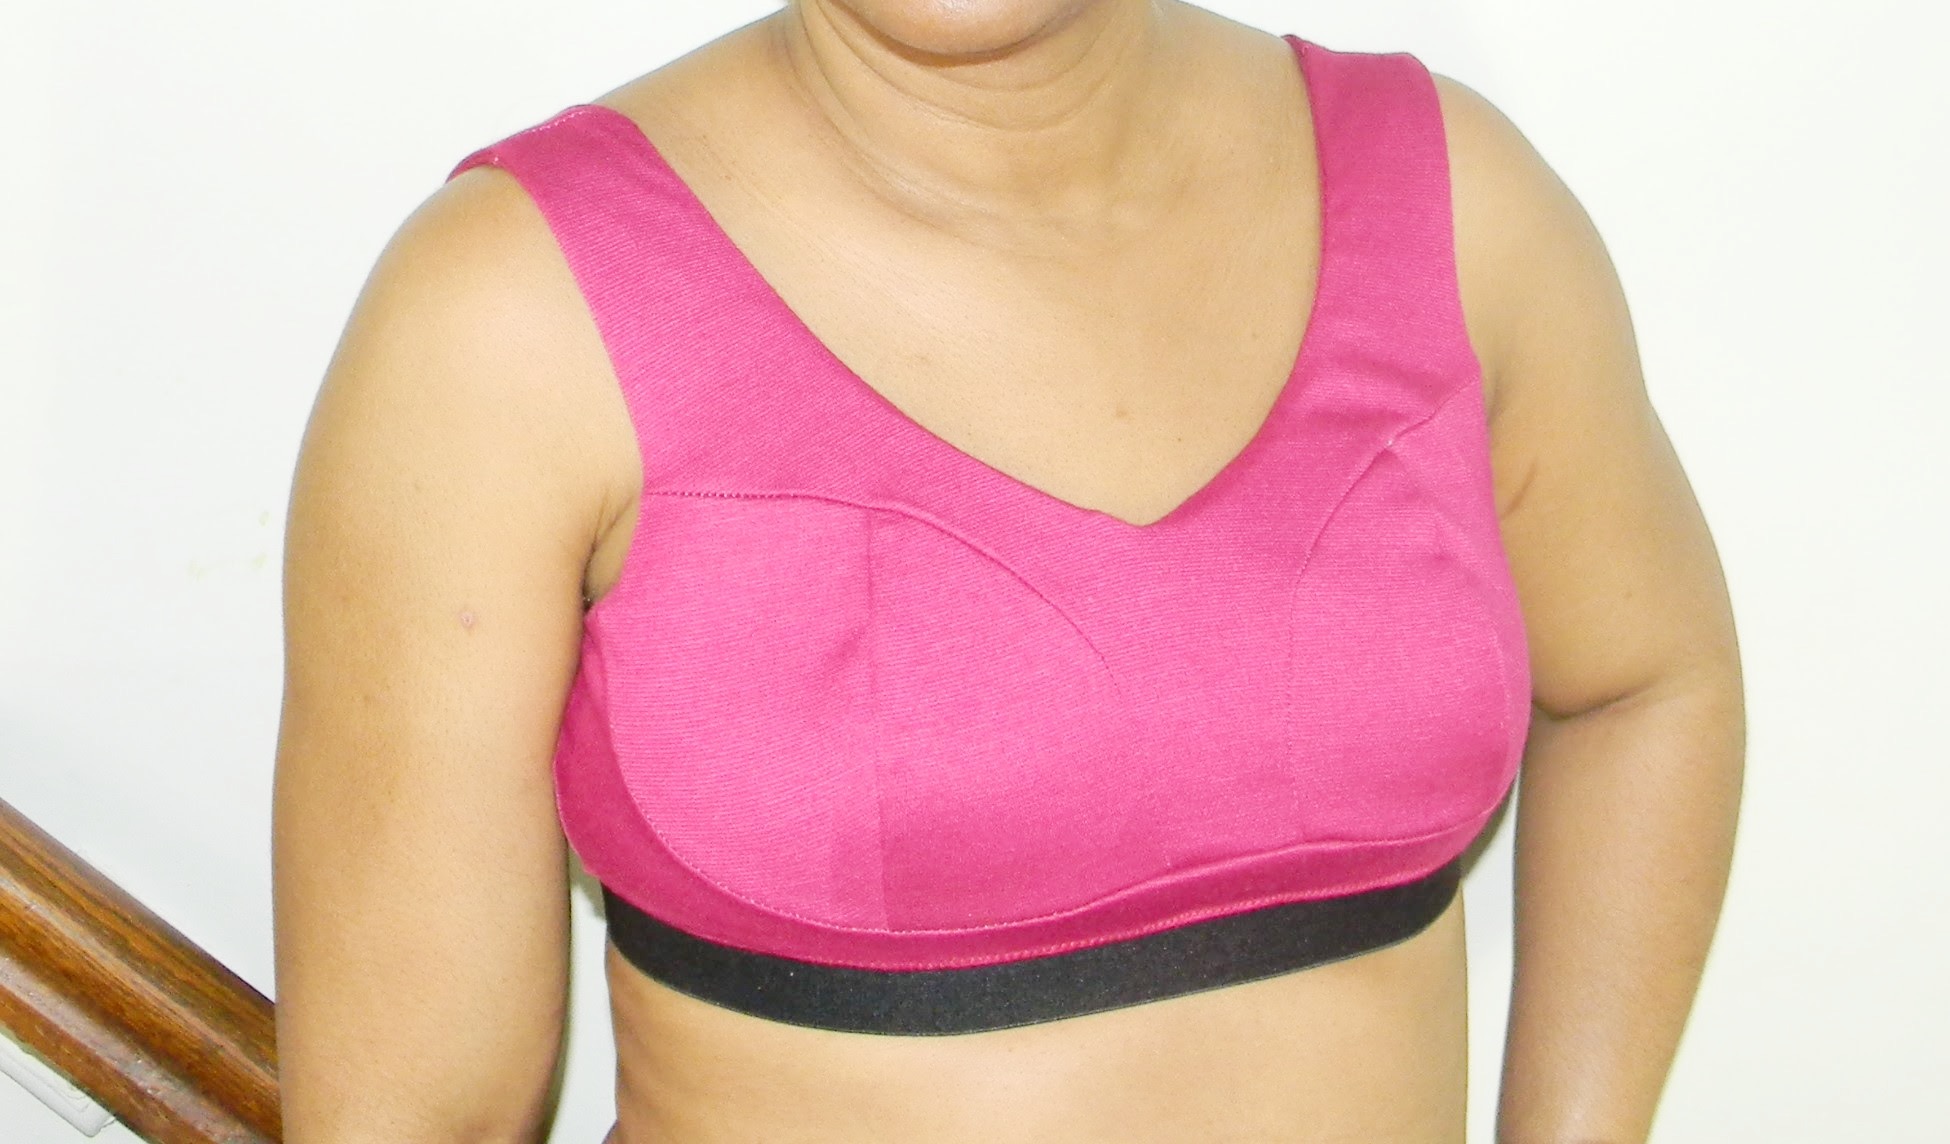 This beginner-friendly sports bra sewing pattern is an essential for your workout wardrobe. A comfy, sporty sew in sizes 28AA to 48M